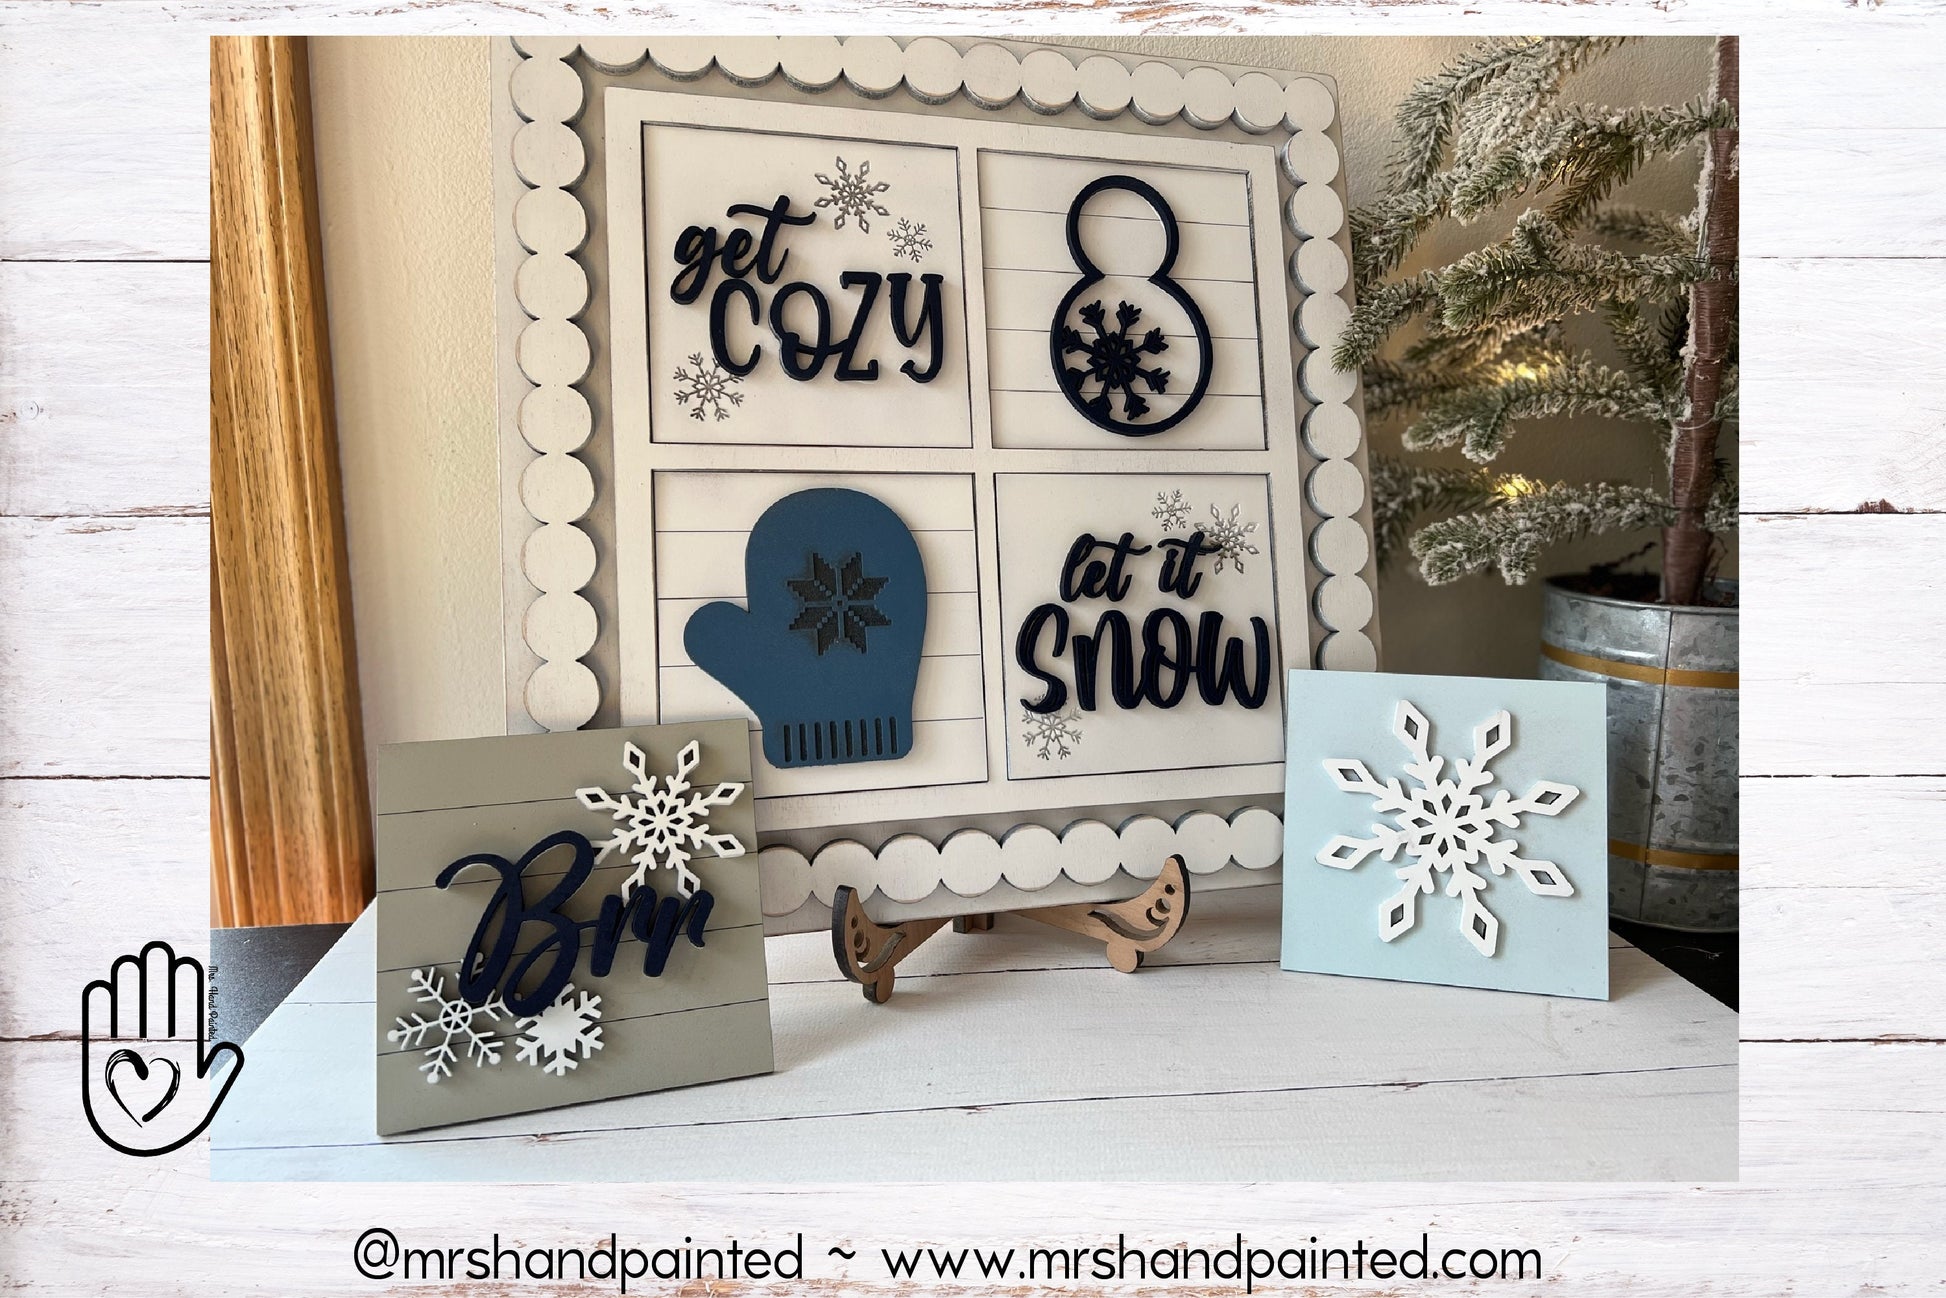 Winter Snow Leaning Ladder Interchangeable Signs - Laser Cut Wood Painted